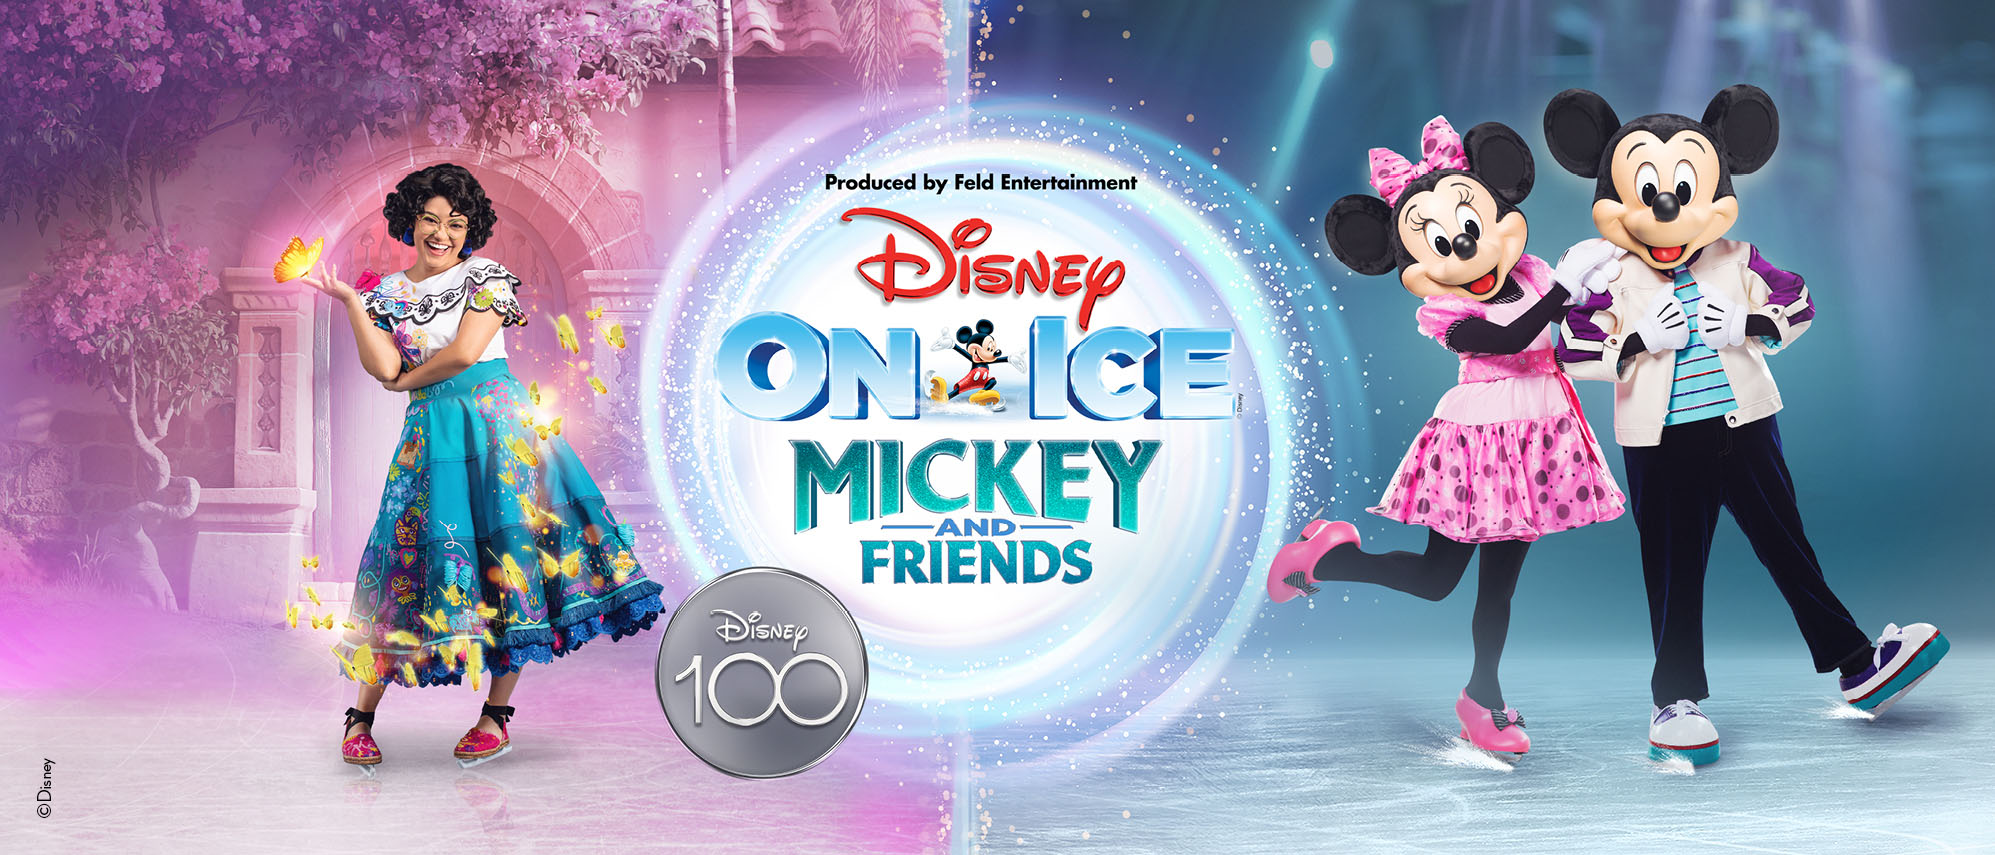 Disney On Ice. Mickey and Friends.